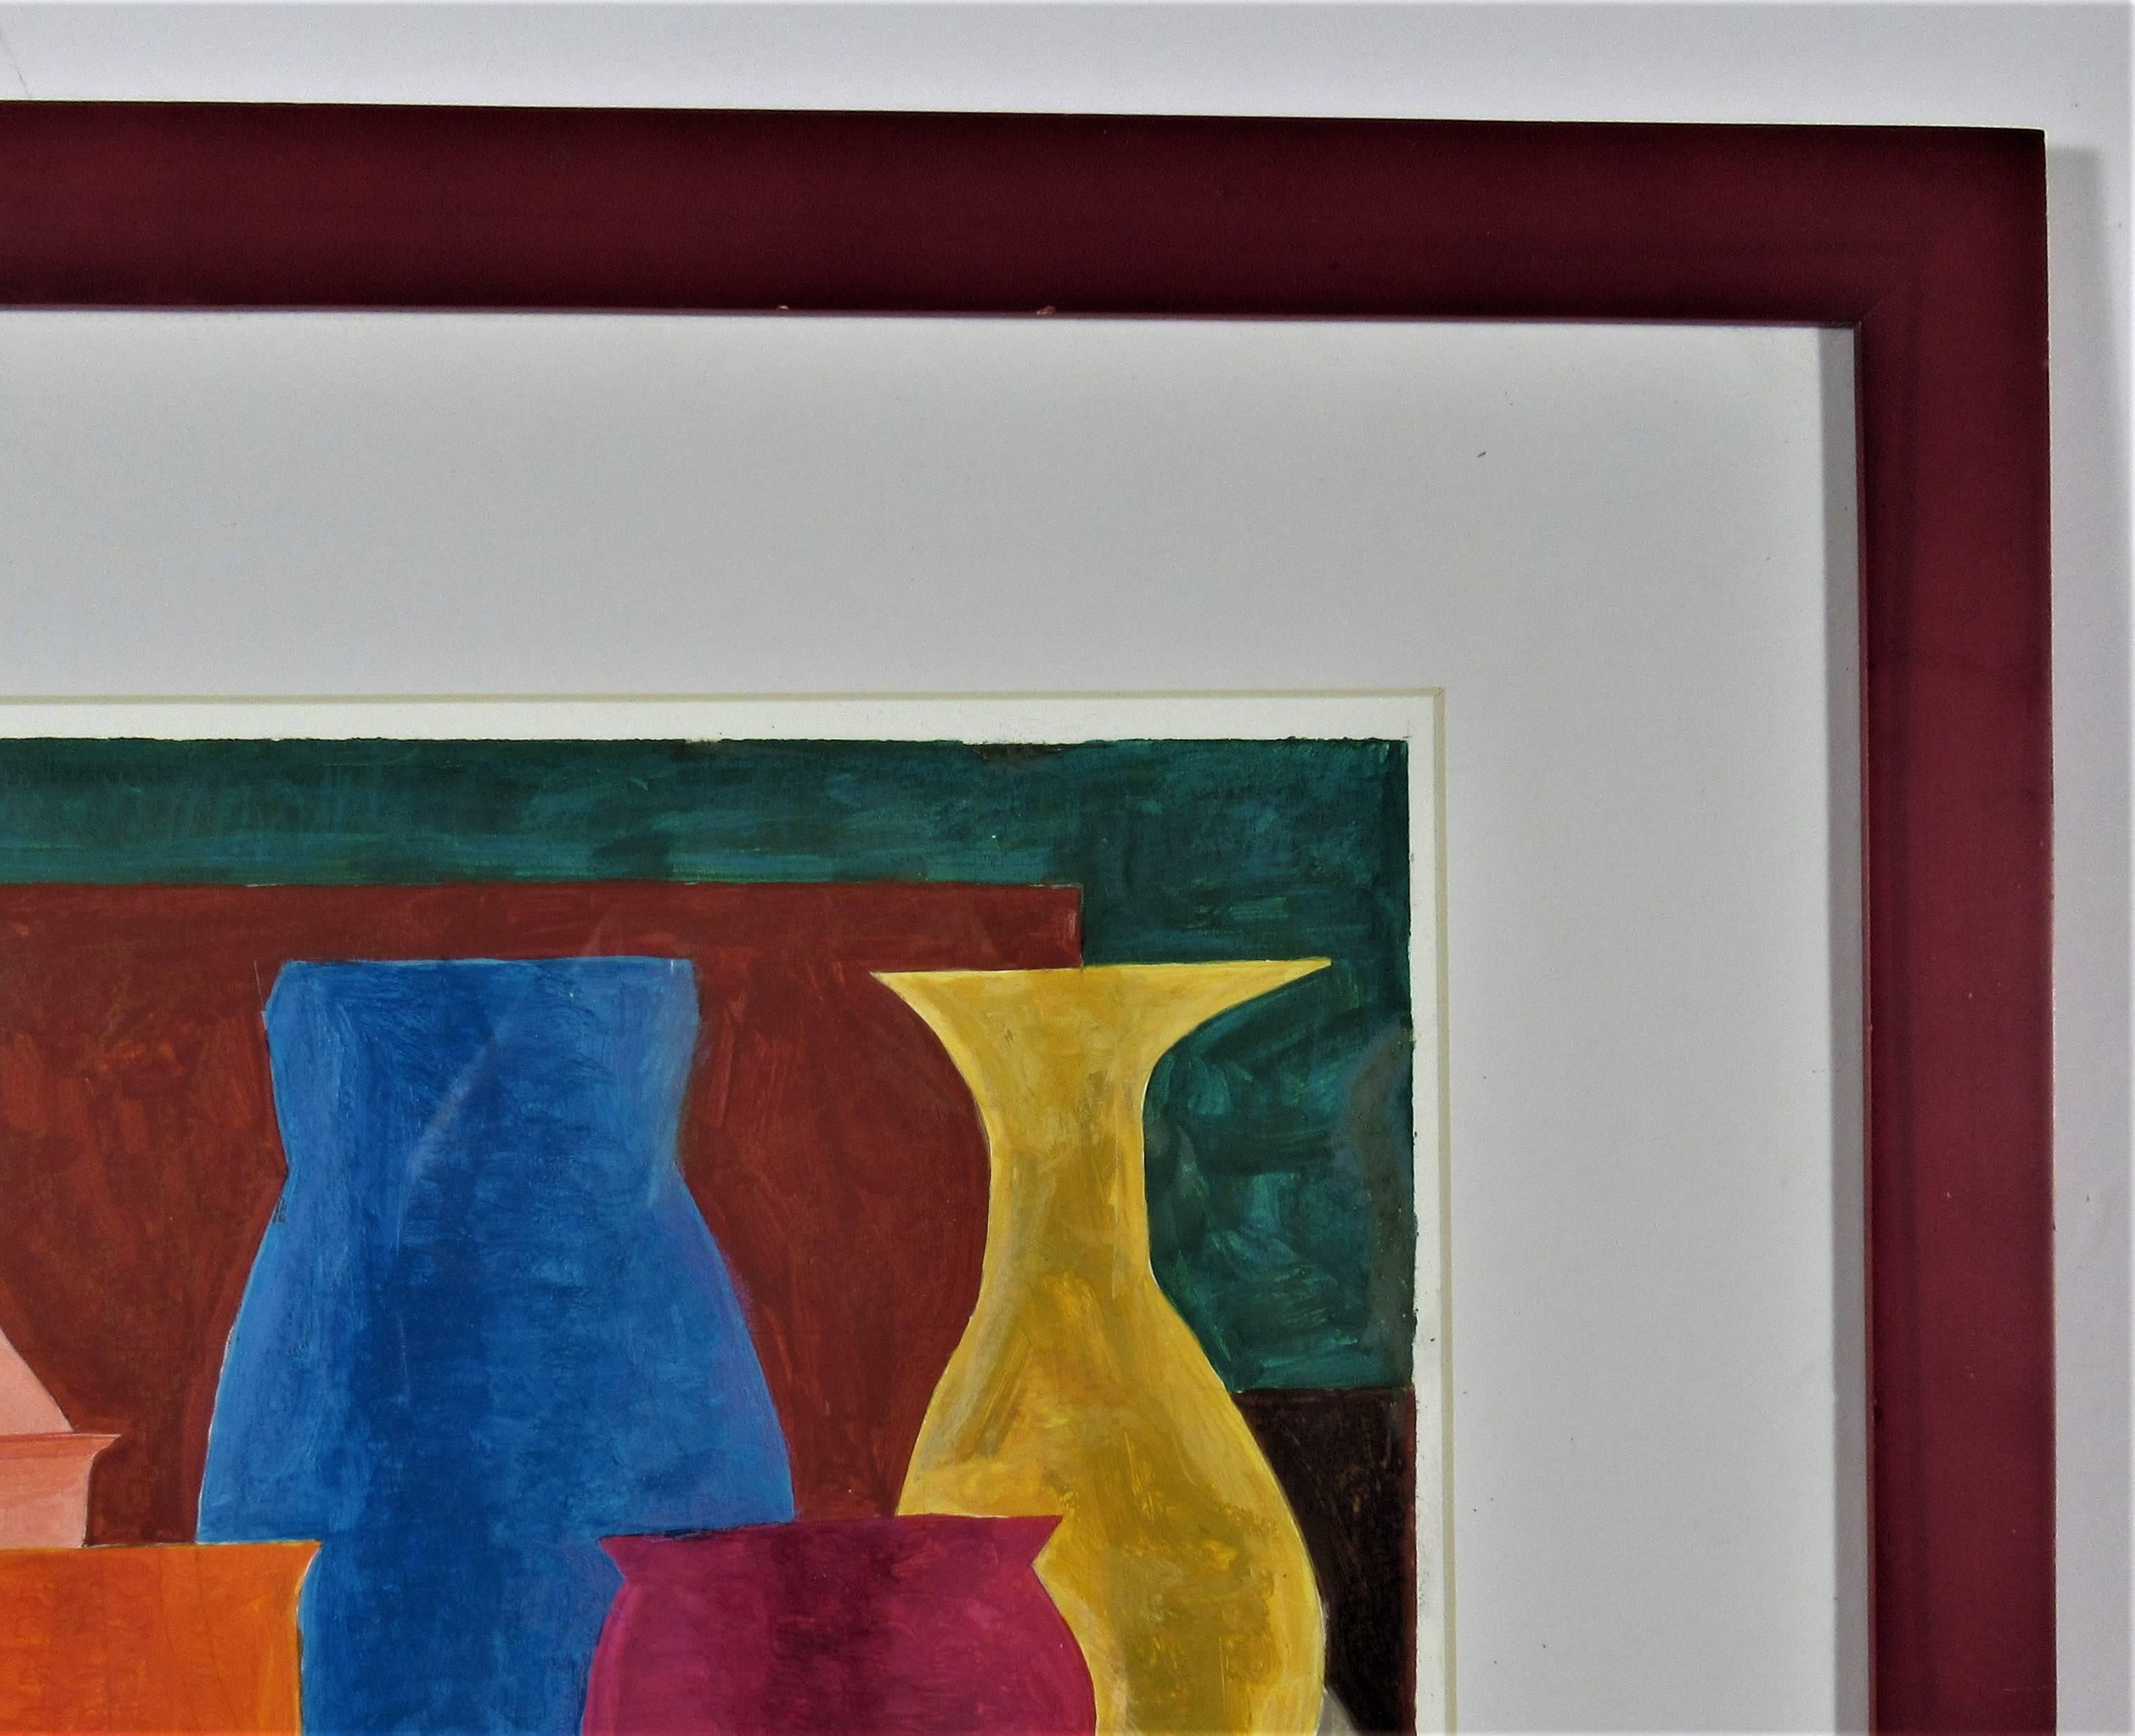 Artist:   David Fox (American, 1920-2011)
Title:   Still Life (Geometric Figure #1)
Year:   2003
Medium:	 Acrylic on paper
Paper:   Watercolor paper
Image size:   10 x 13 inches
Paper size:    10 x 13 inches
Signature:   Signed and dated lower right